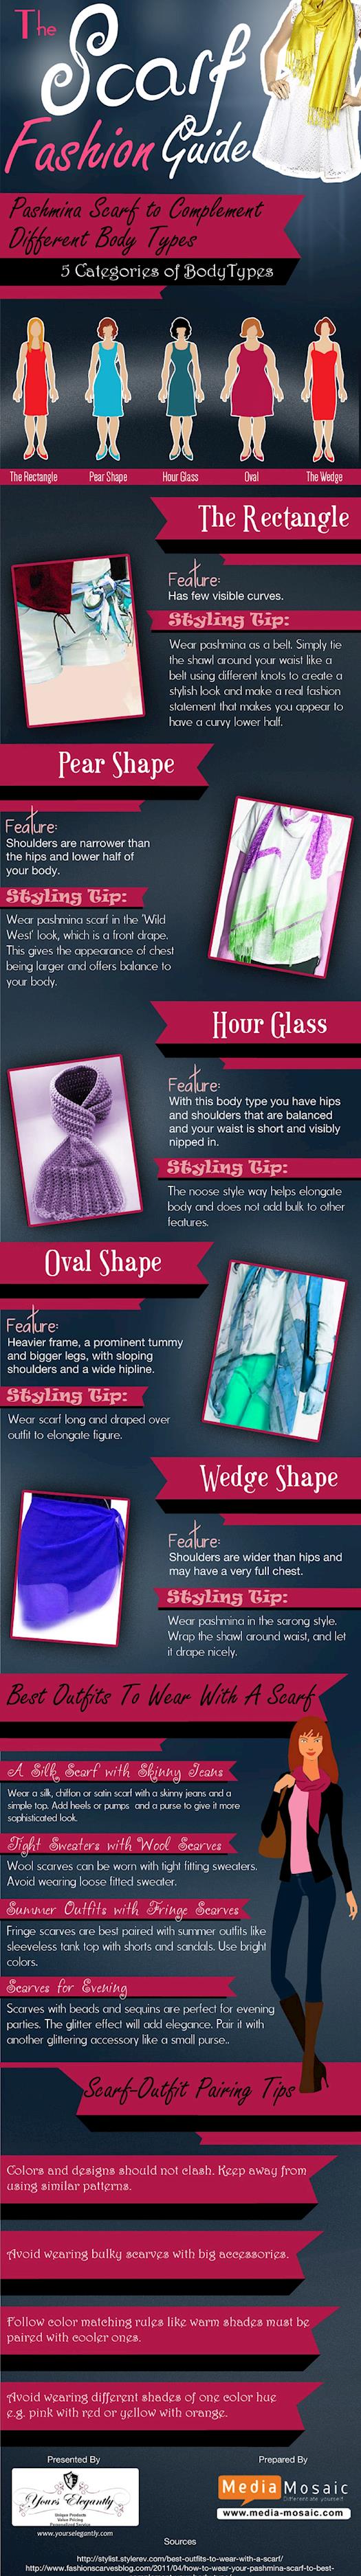 The Scarf Fashion Guide [Infographic]